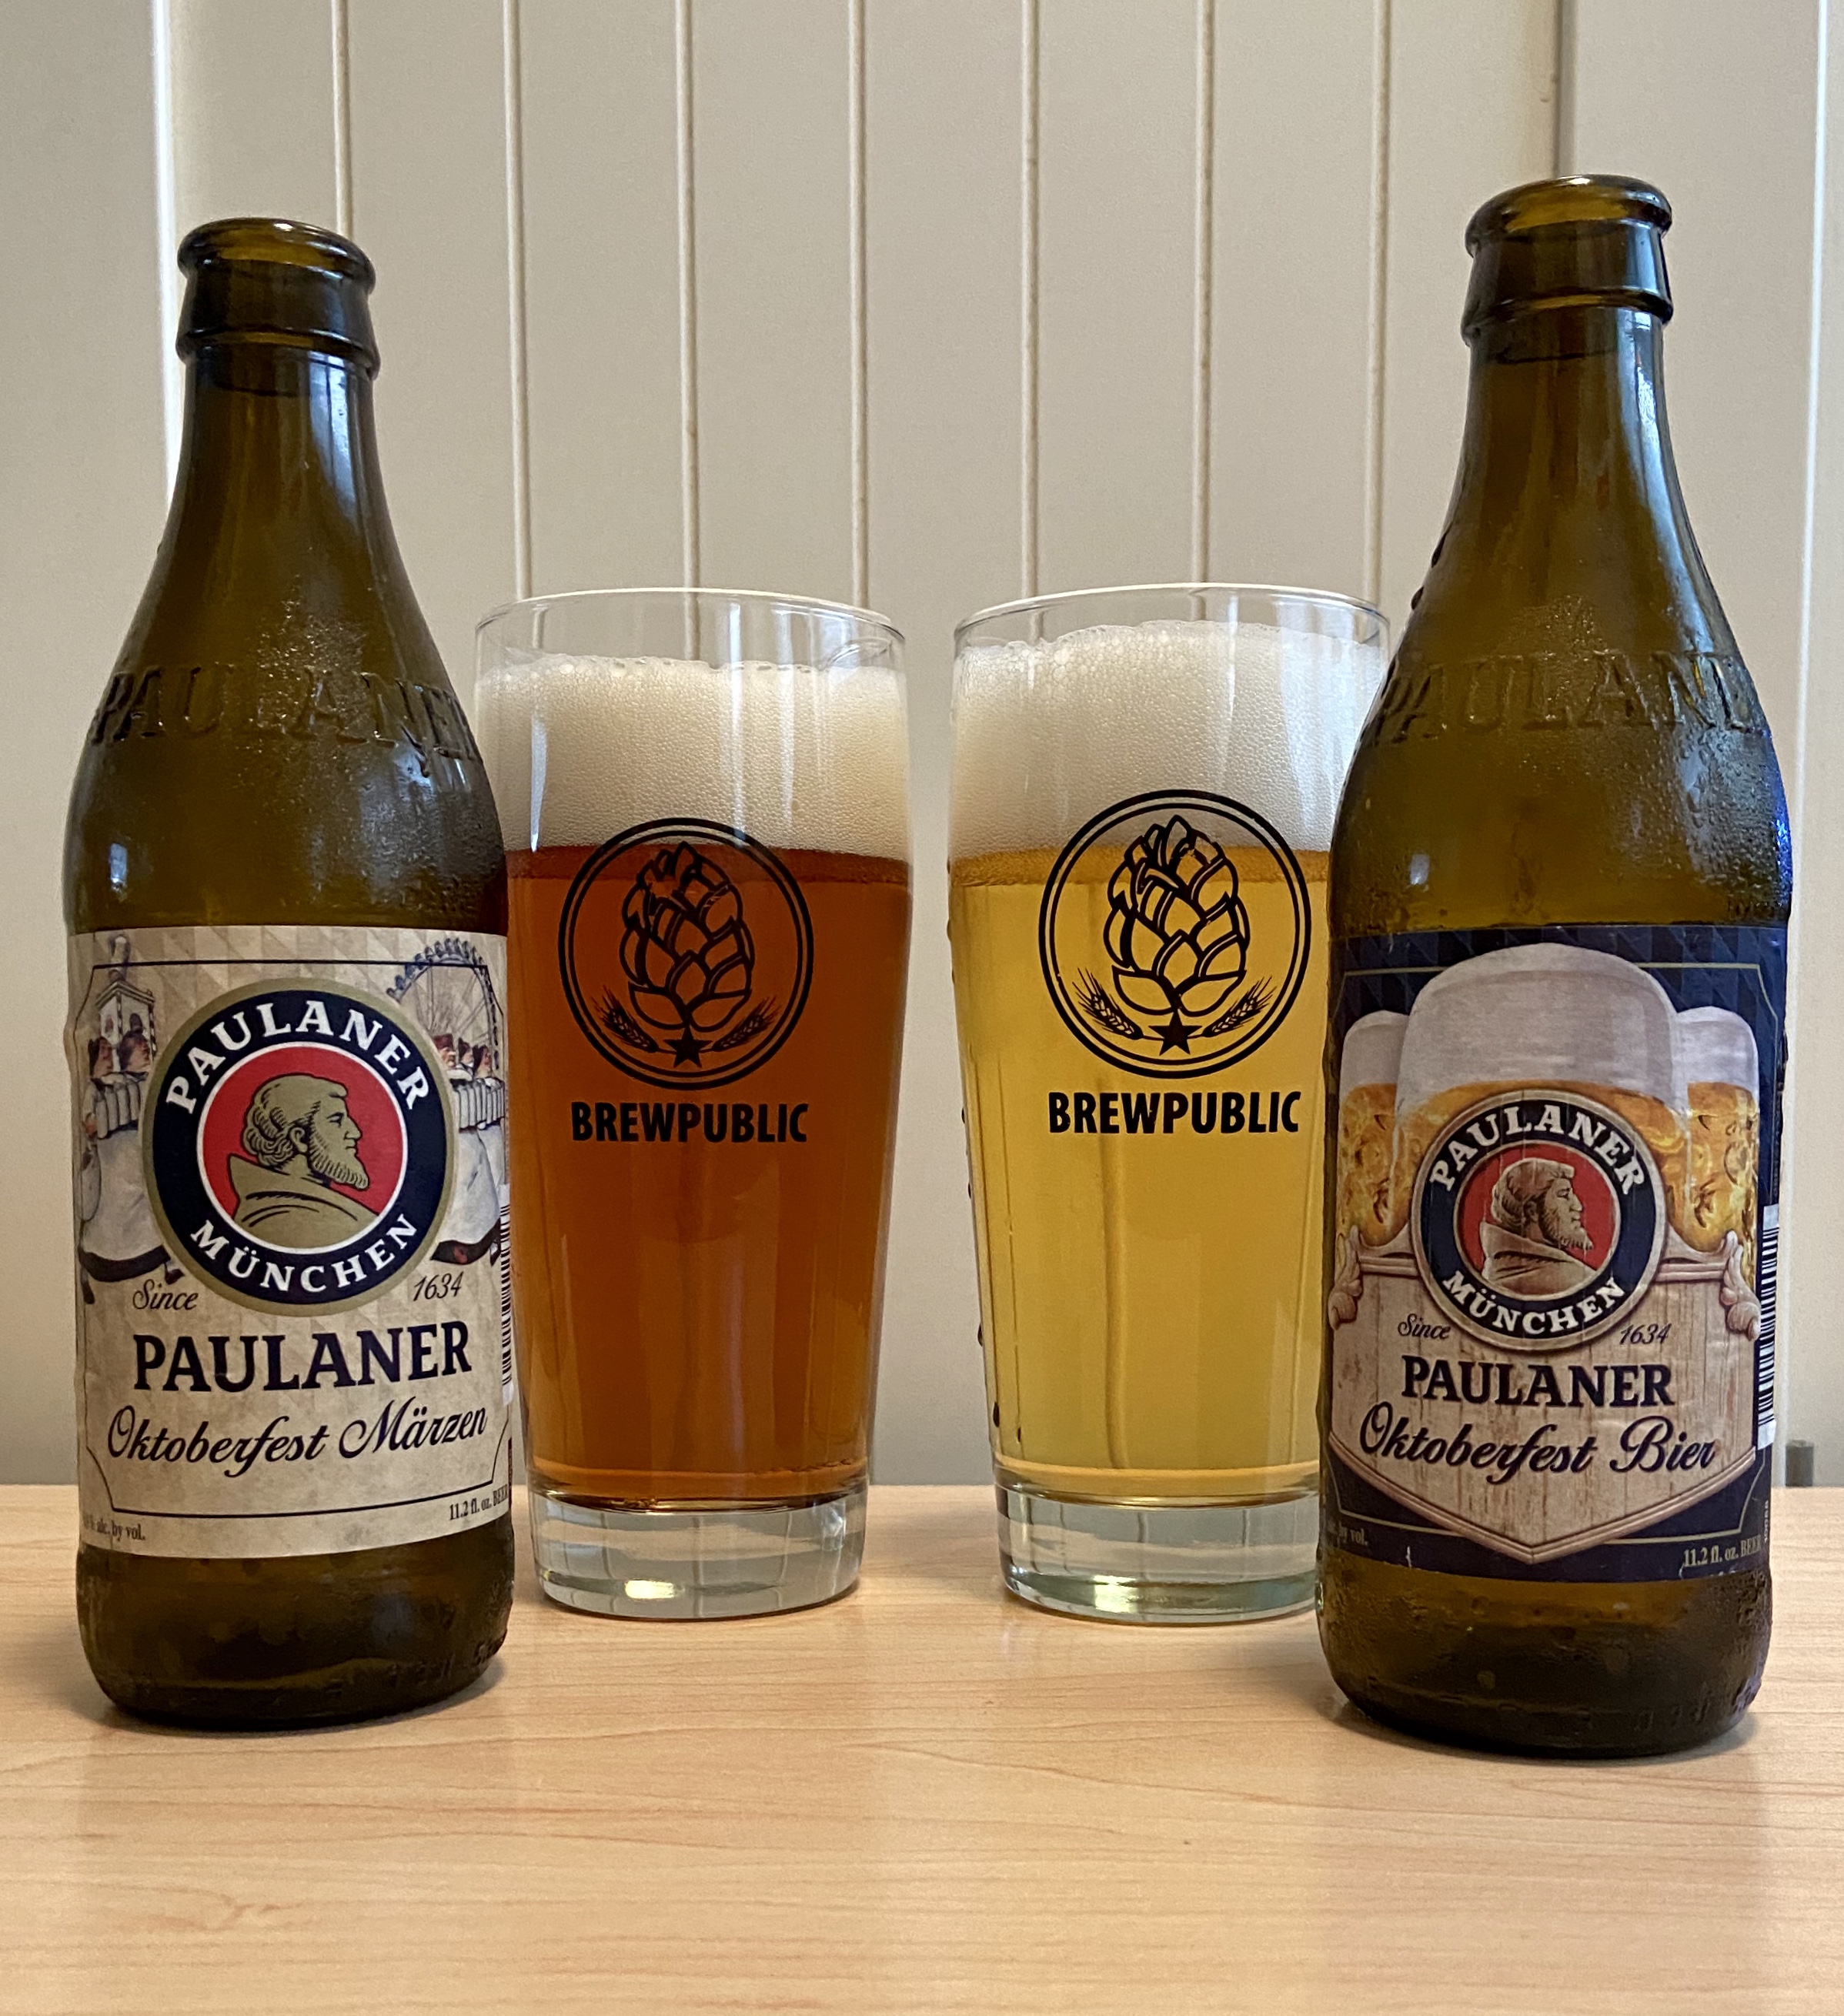 Glass pours of Paulaner Oktoberfest Marzen and Paulaner Oktoberfest Bier